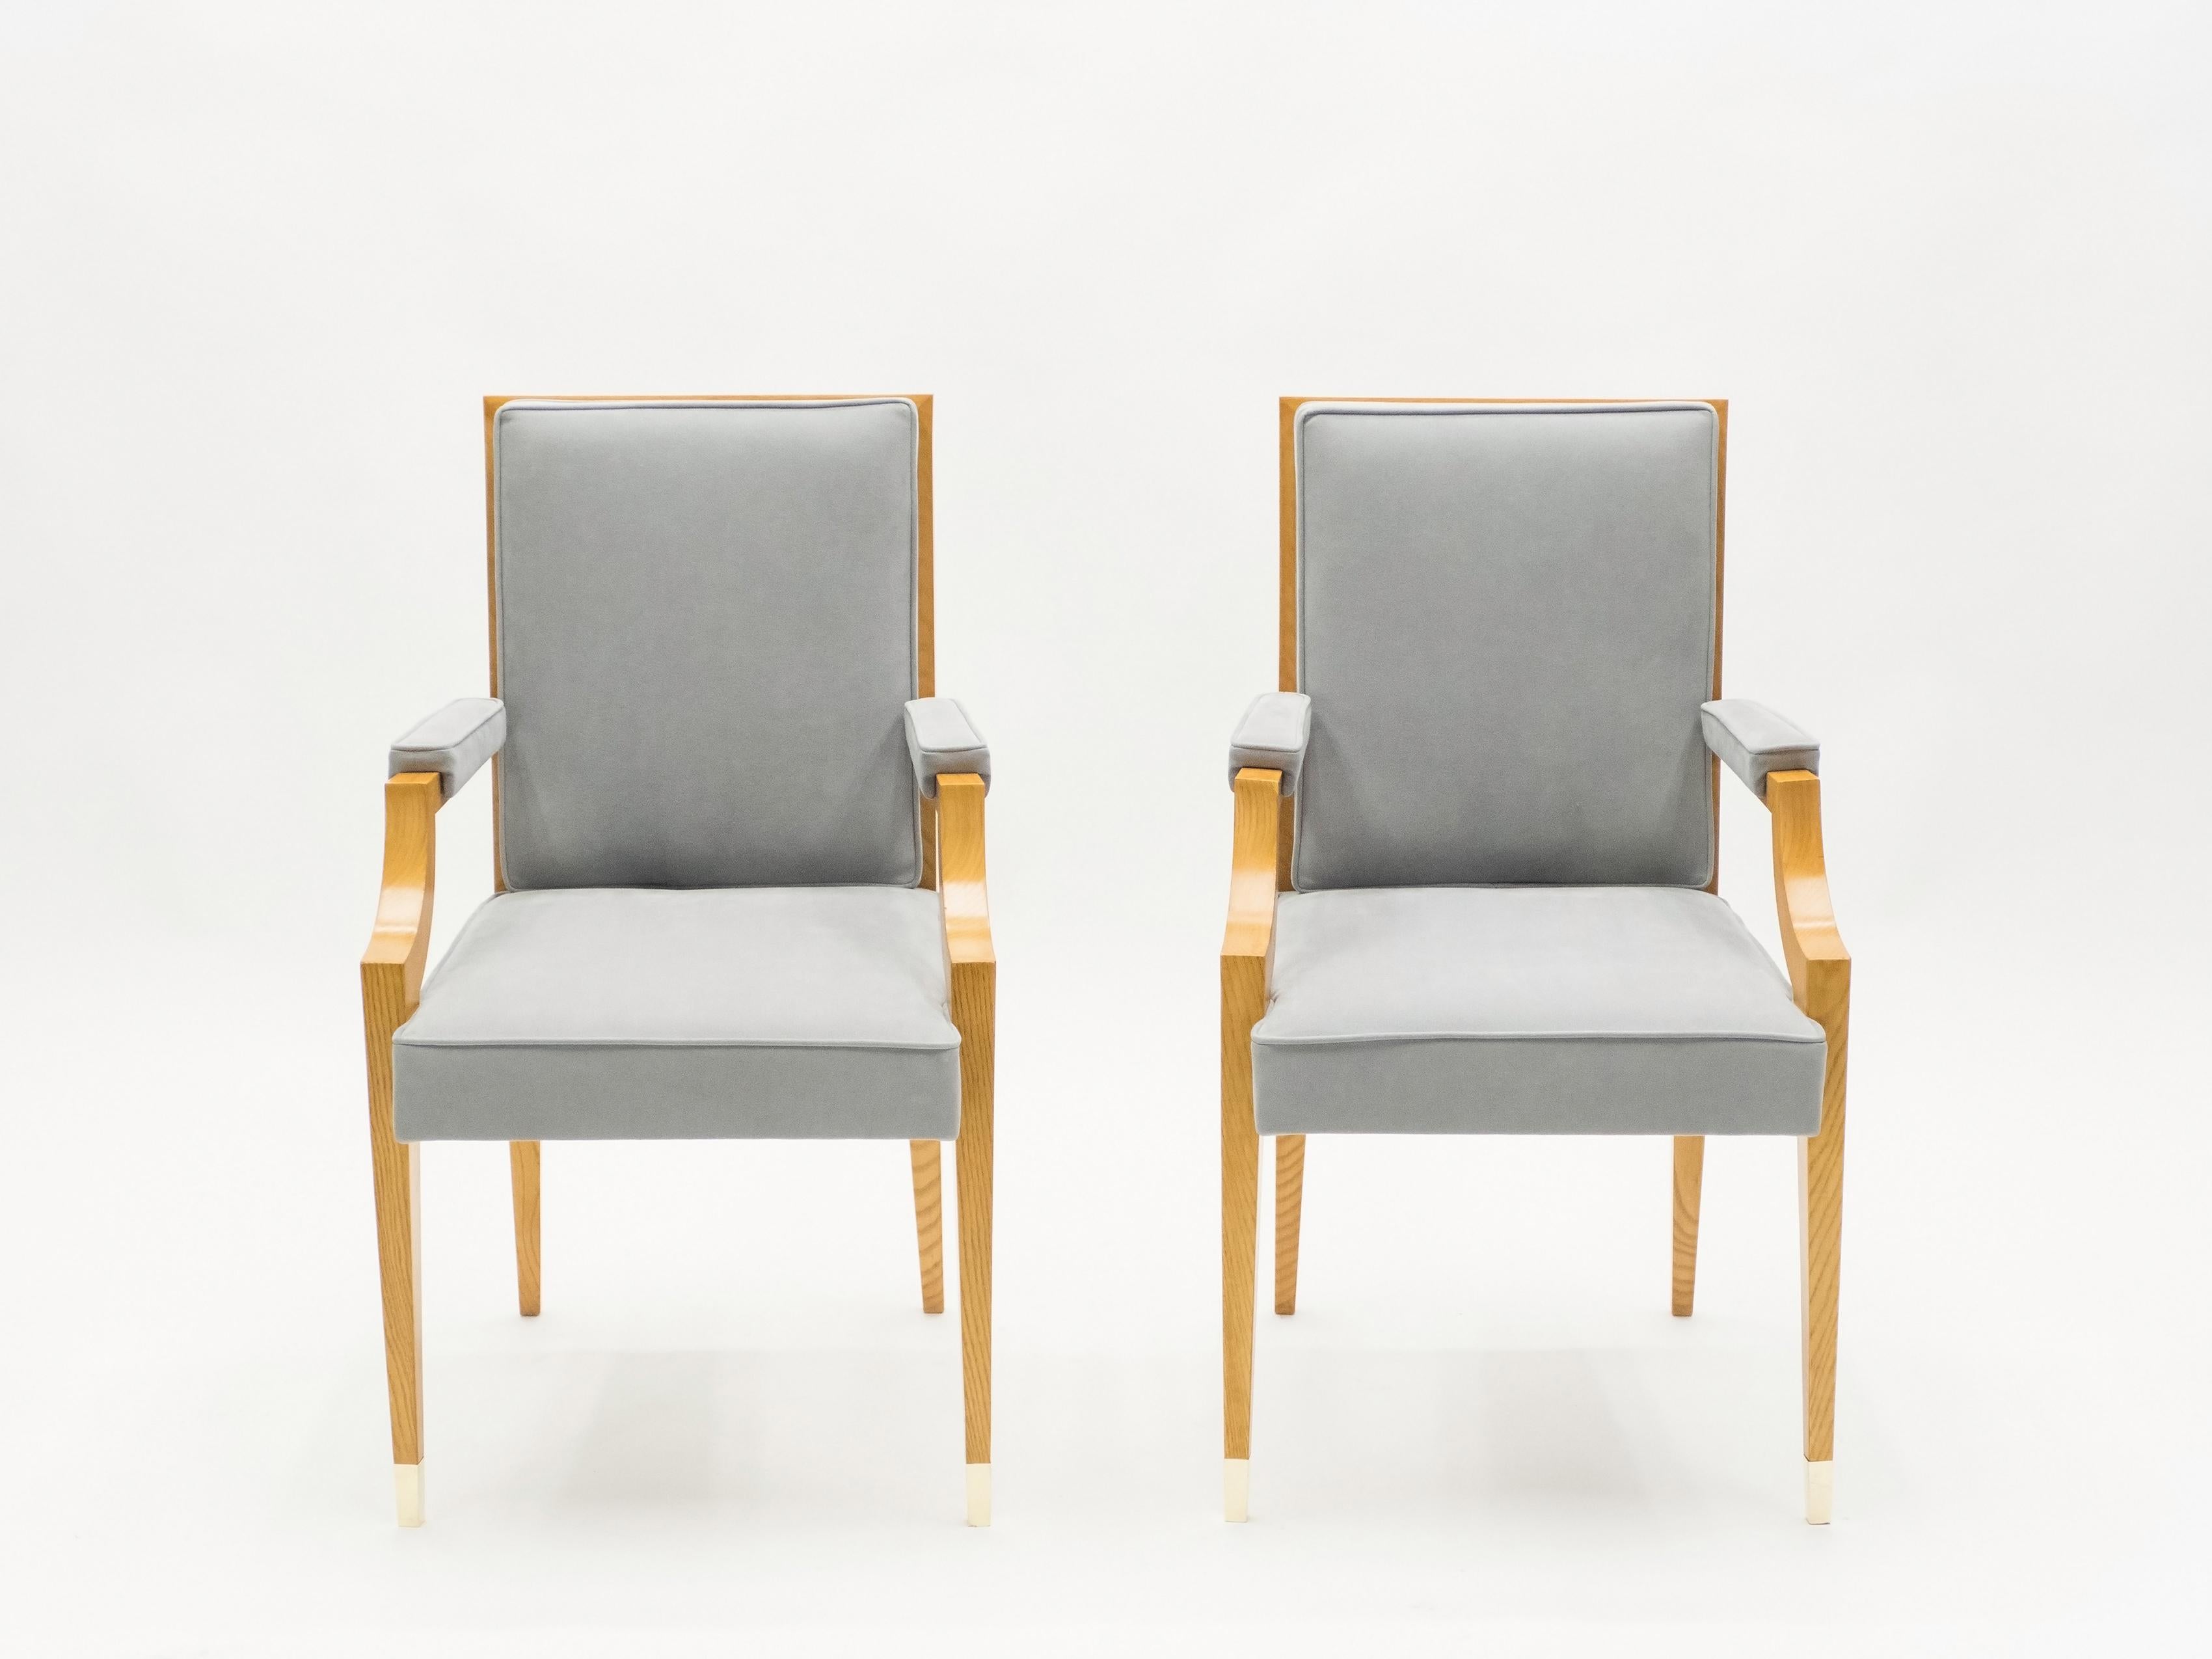 These elegant André Arbus armchairs are sure to add an element of French neoclassicism chic to any room in your home. They were designed and produced by André Arbus for the headquarters of the Compagnie Générale Transatlantique in the late 1940s.